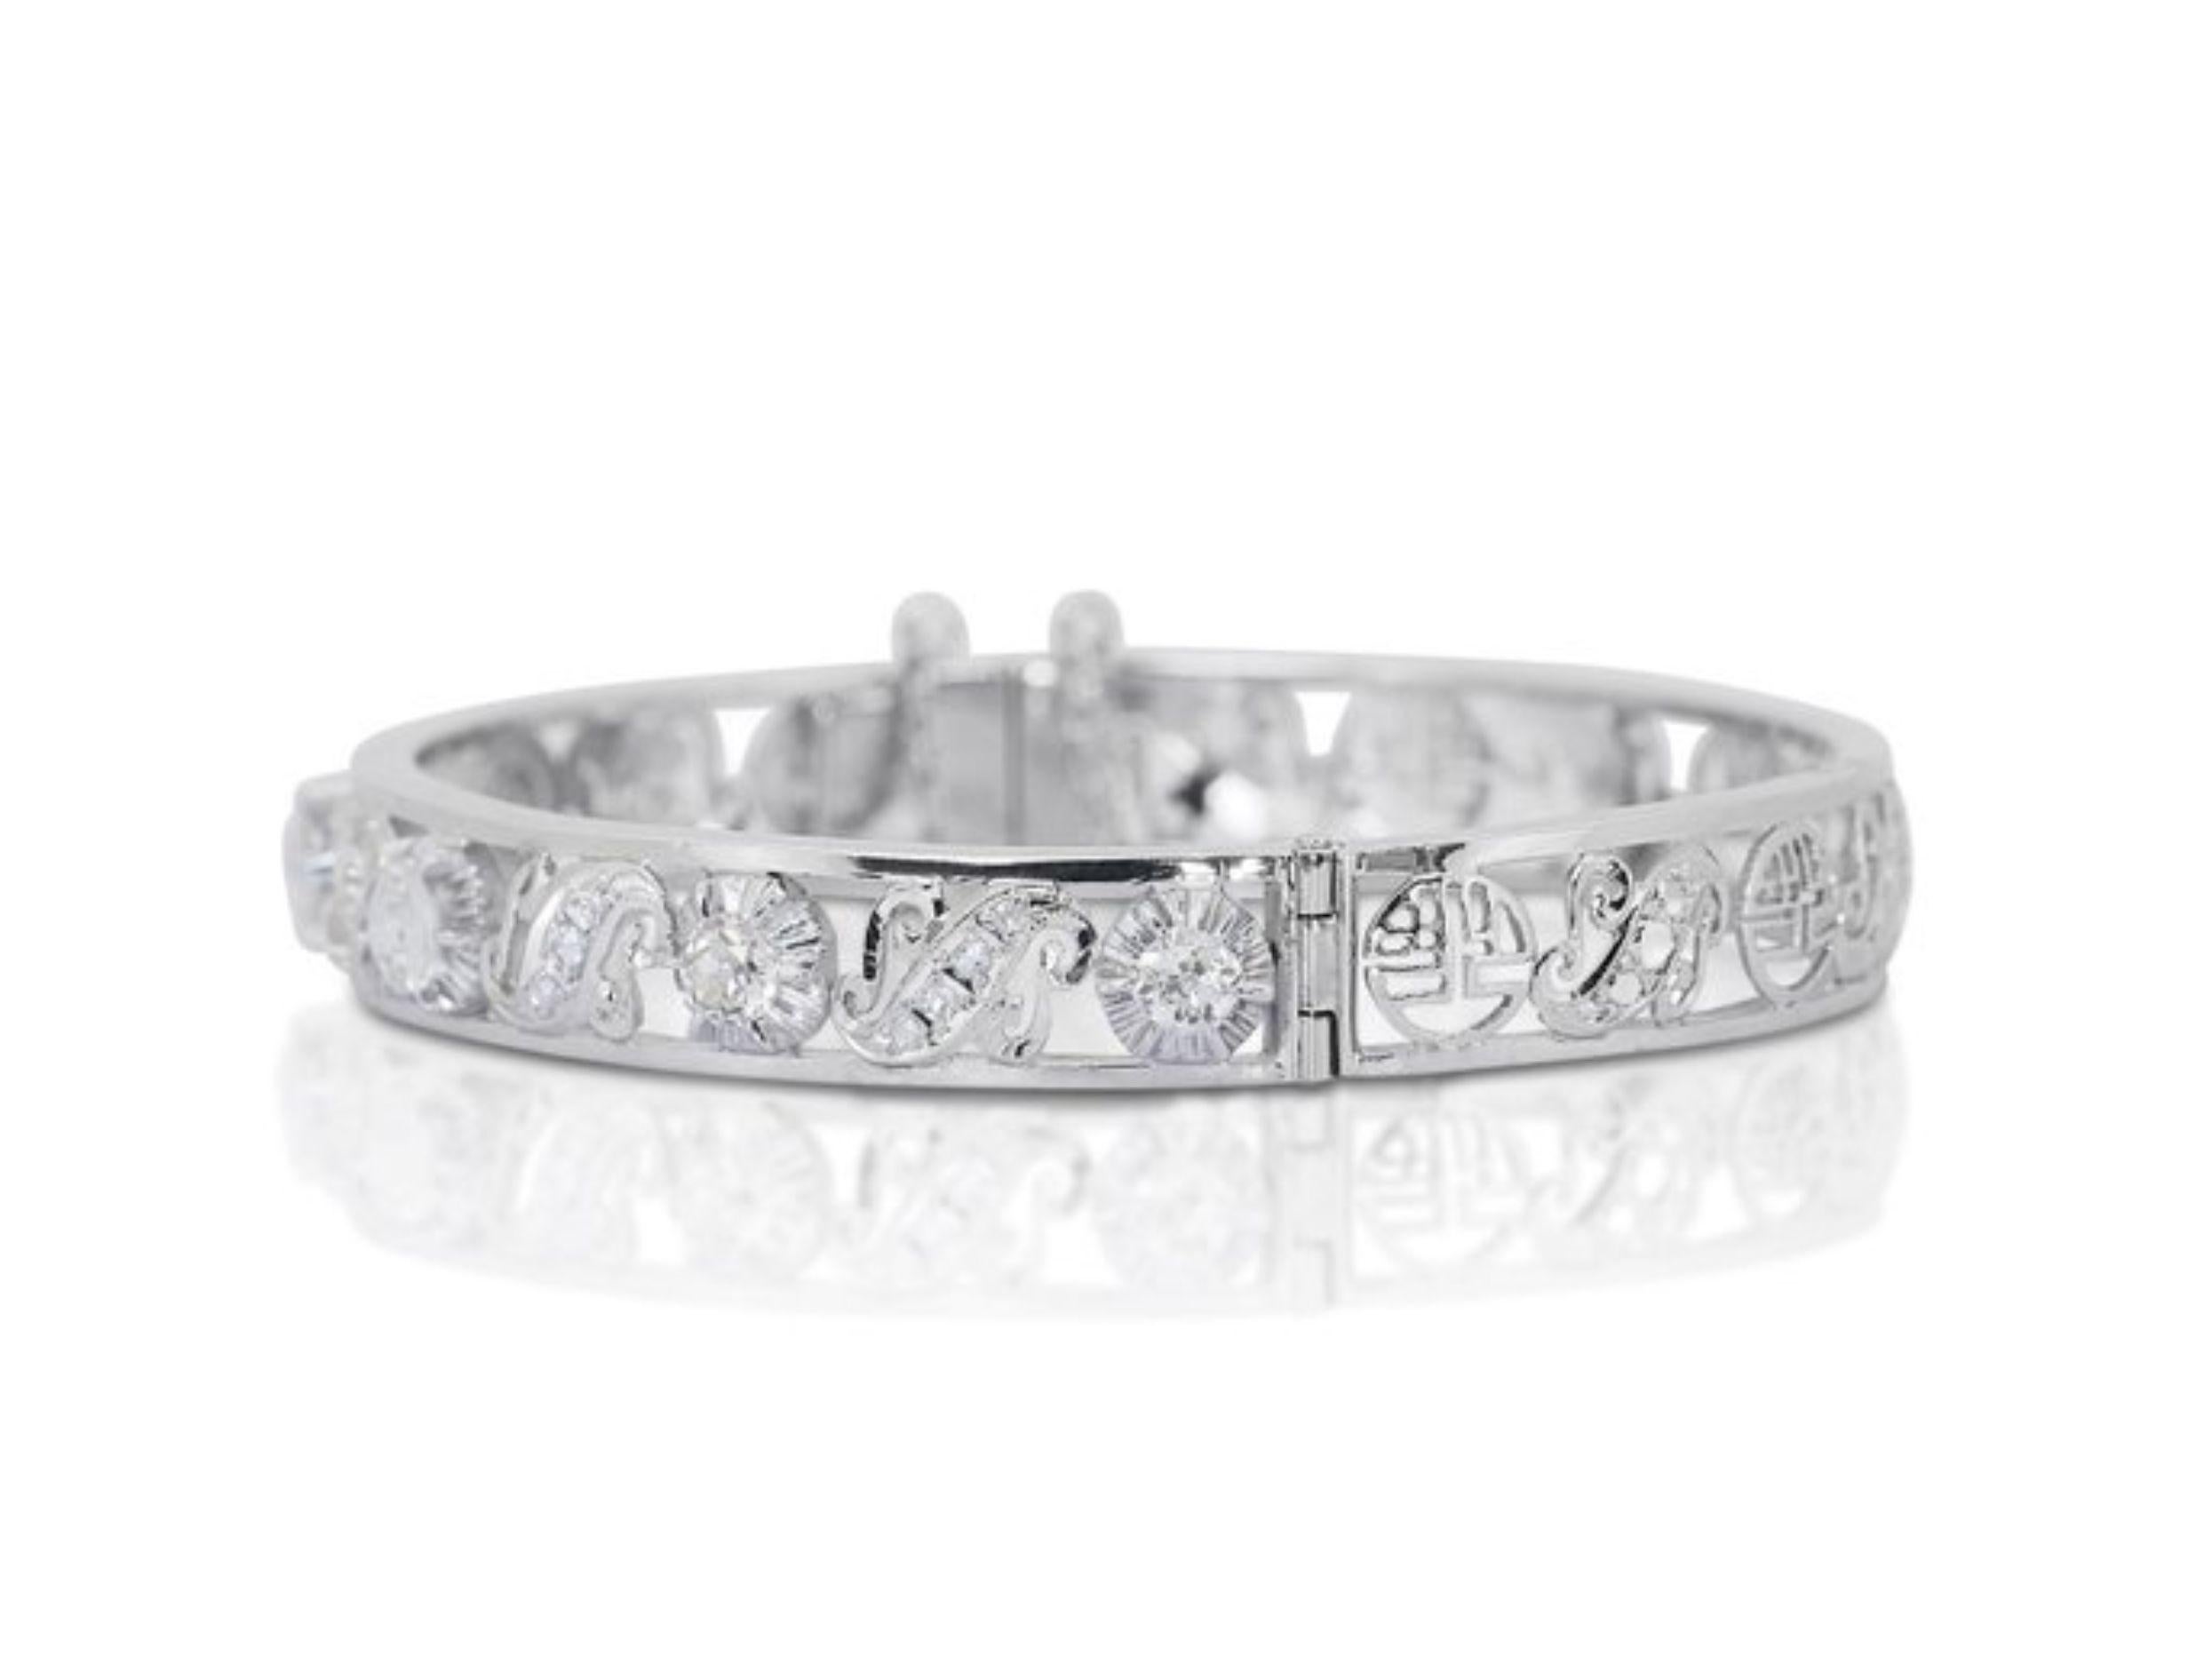 Enchanting 1.8ct Old Mine Cut Diamond Bracelet In New Condition For Sale In רמת גן, IL